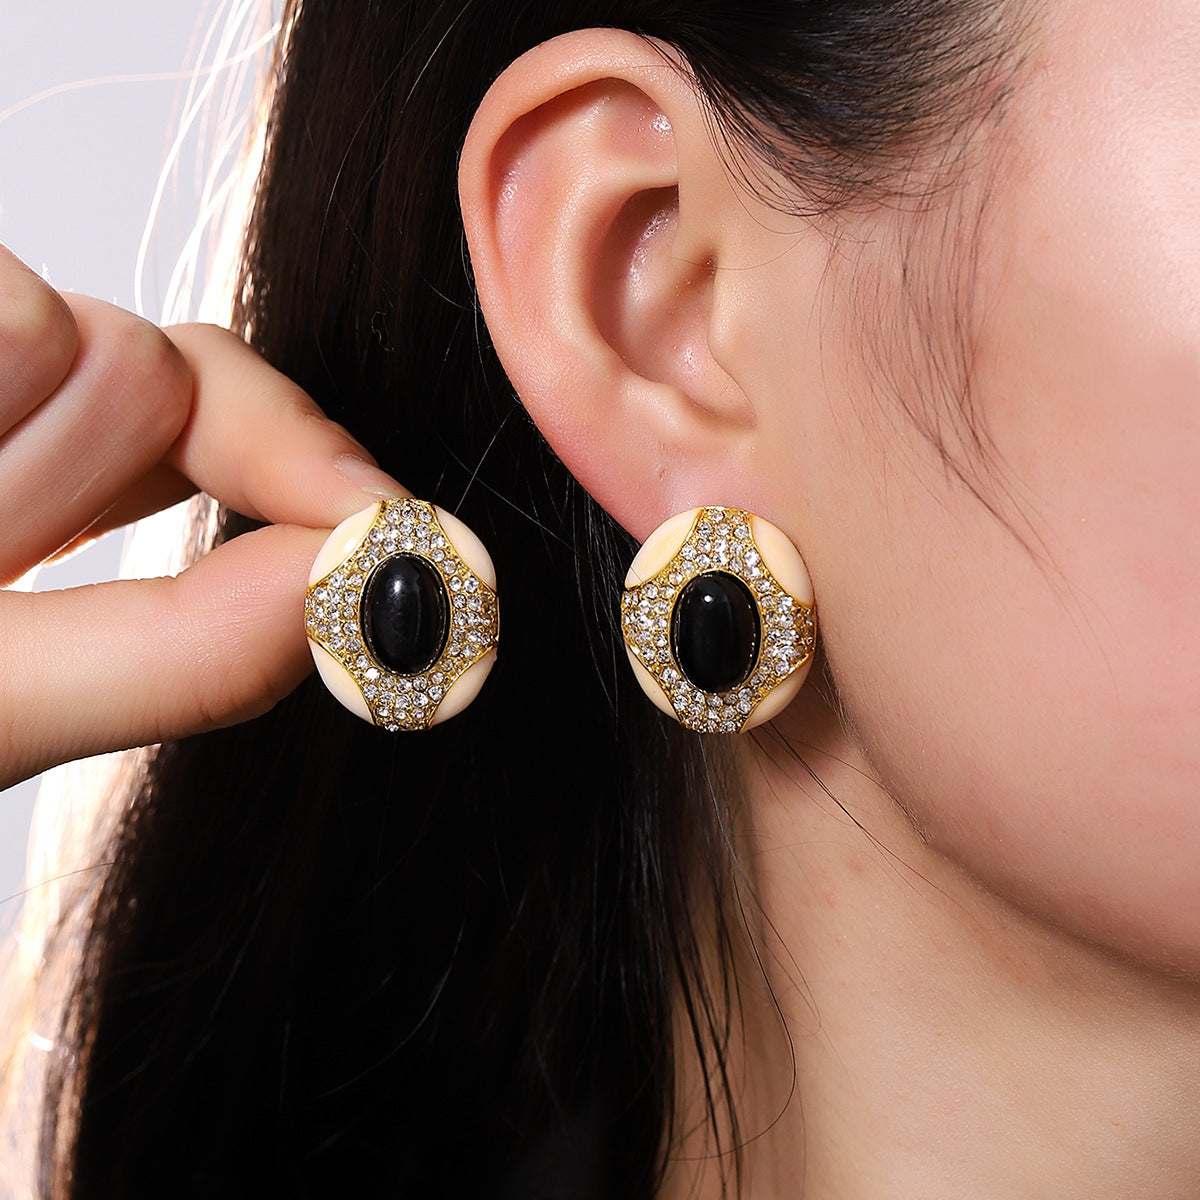 Ancient Dripping Oil Rhinestone Palace Style Earrings